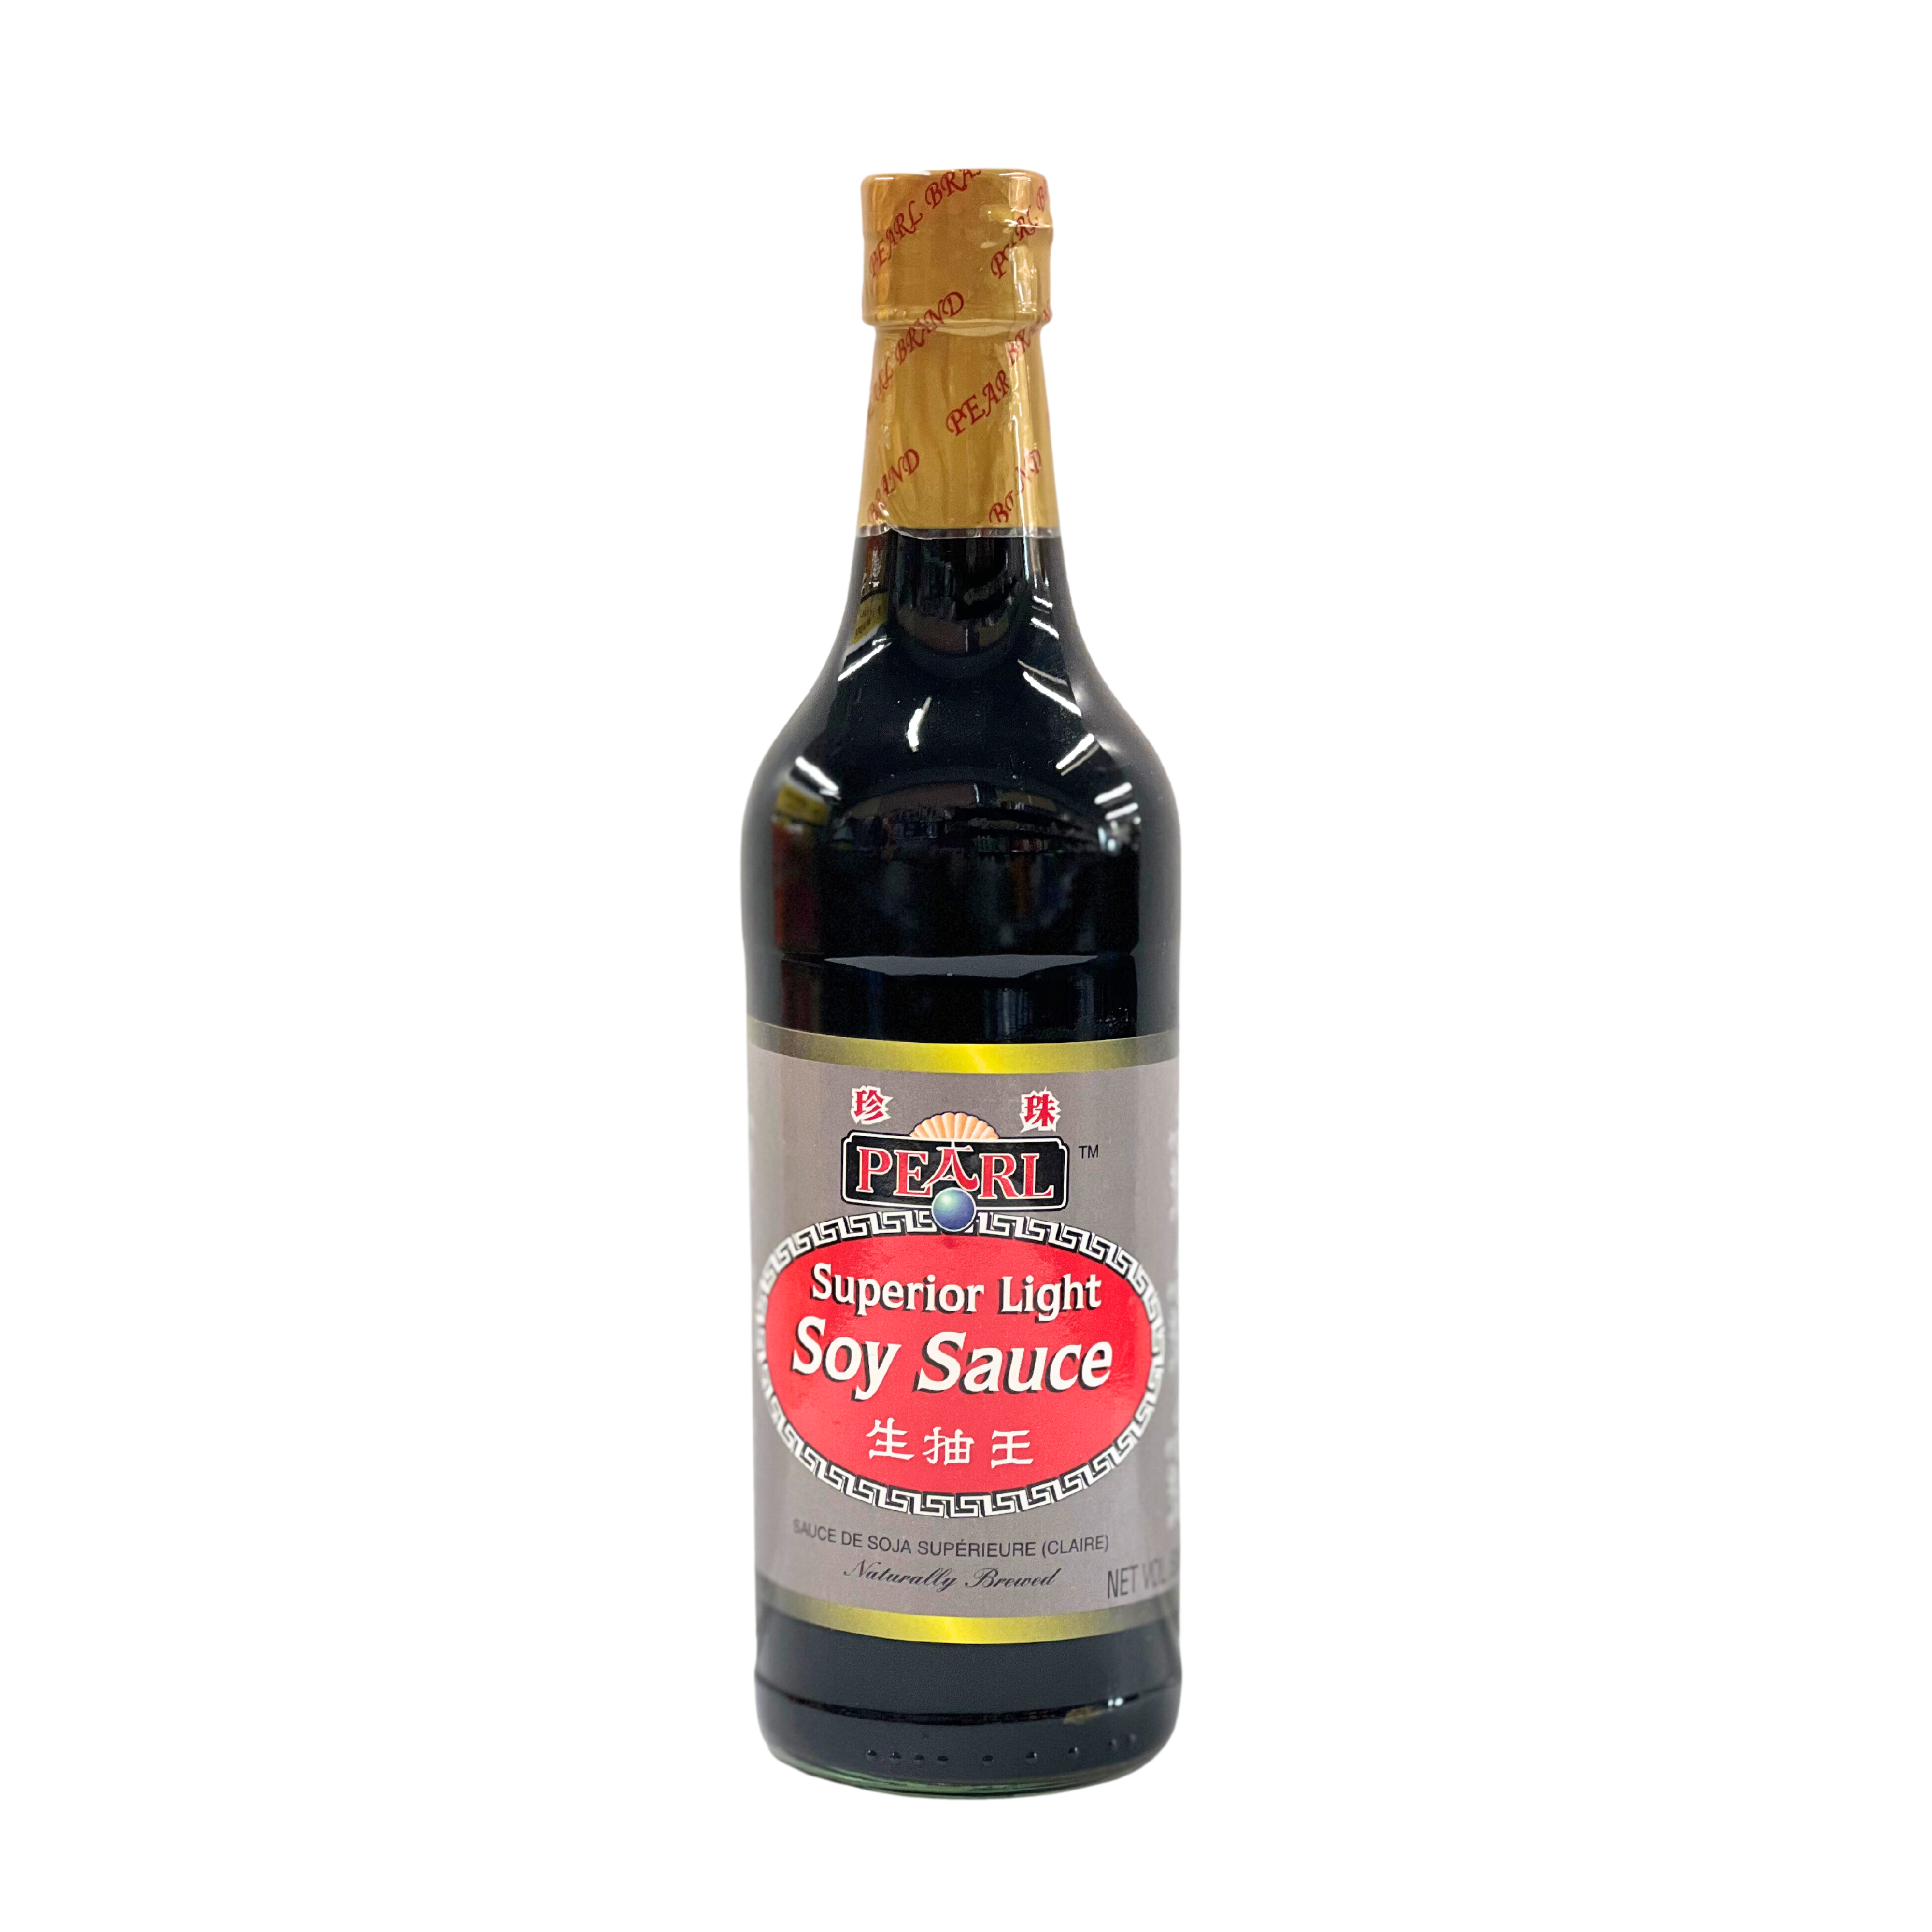 Pearl Superior Light Soy Sauce500ml